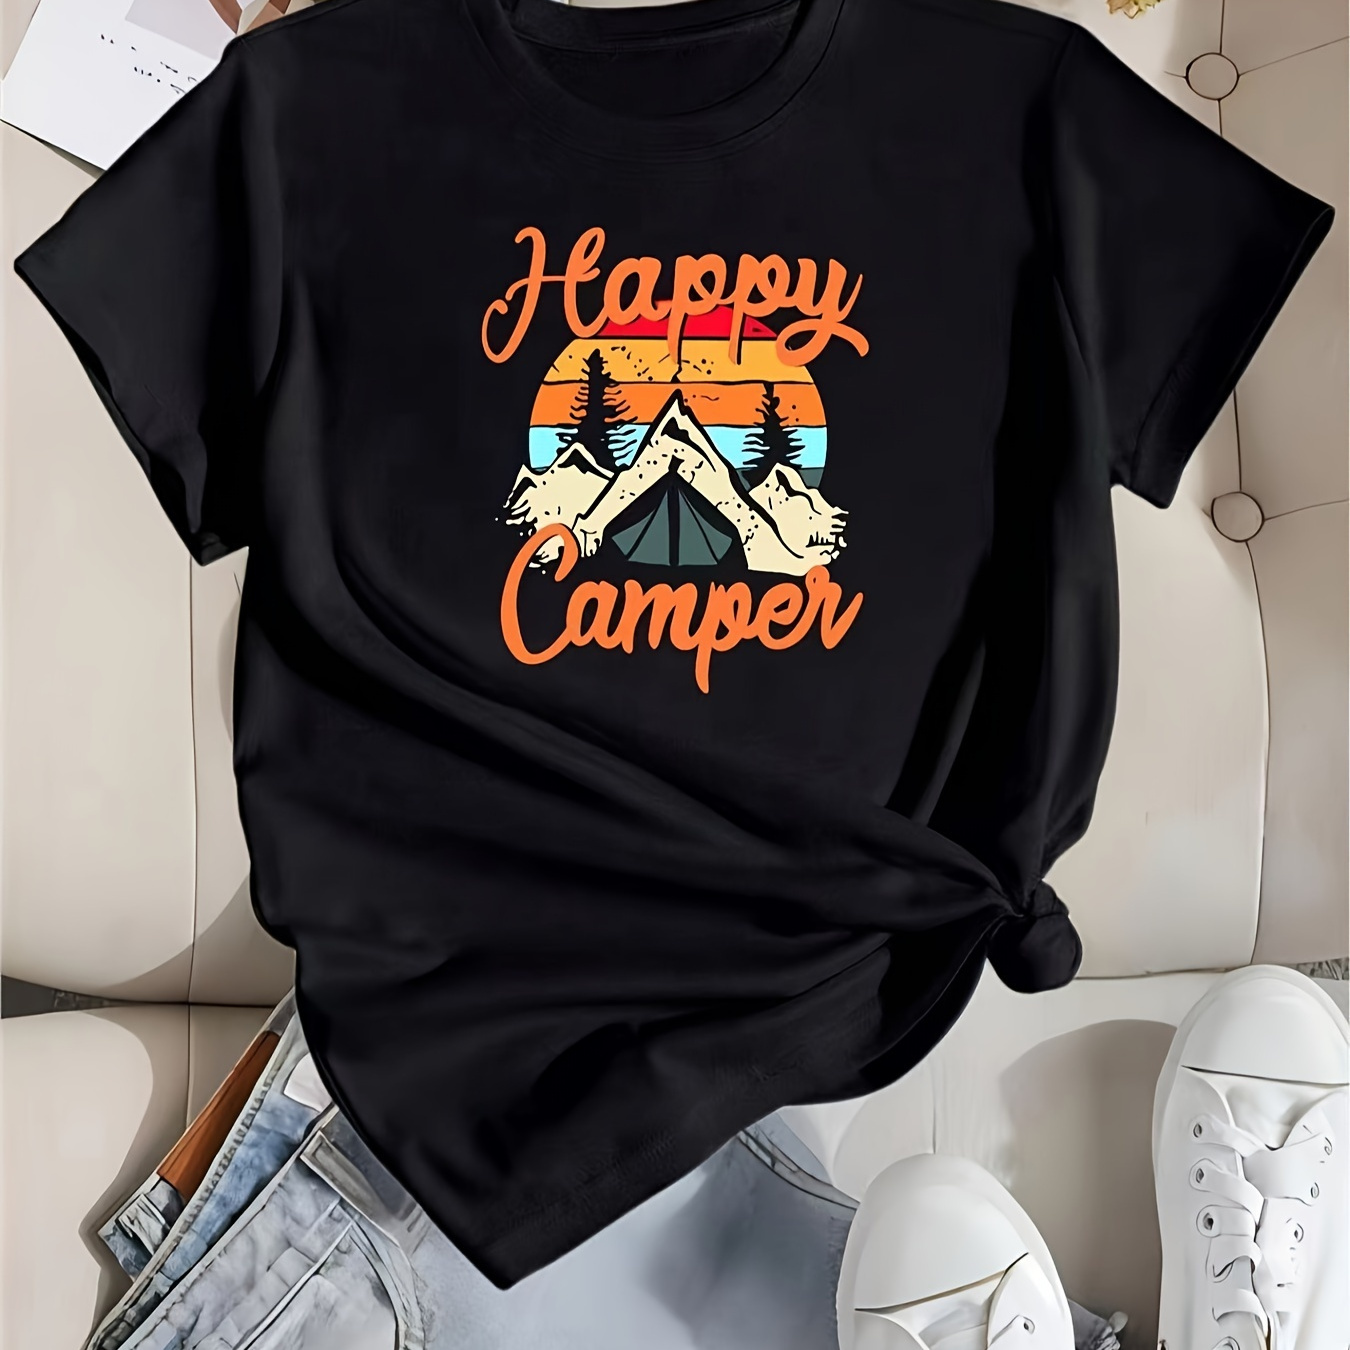 

Happy Camper Print Round Neck Sports T-shirt, Short Sleeve Running Casual Tops, Women's Activewear